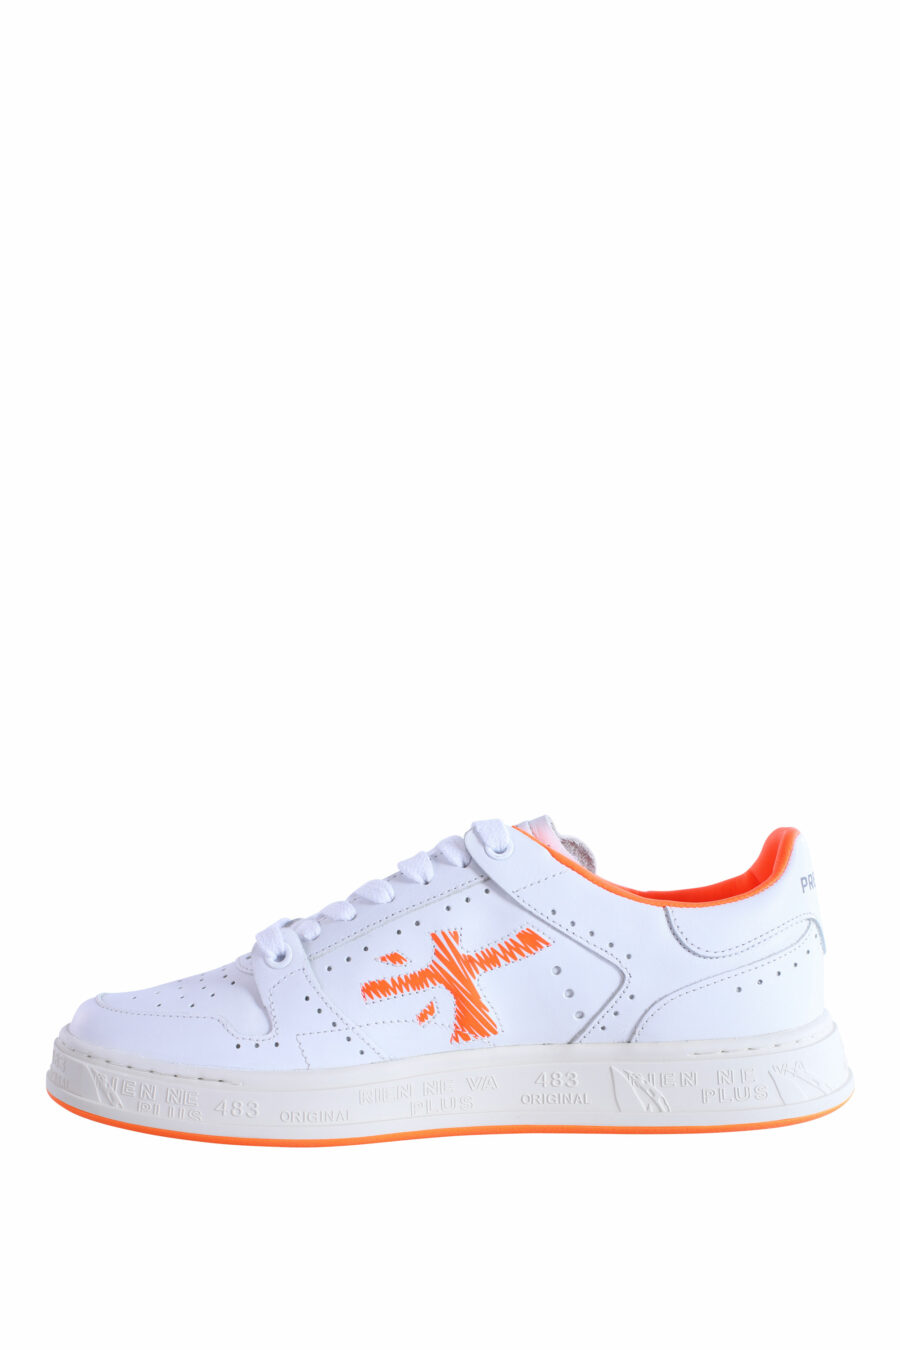 White trainers with orange "quinn 6302" - IMG 2997